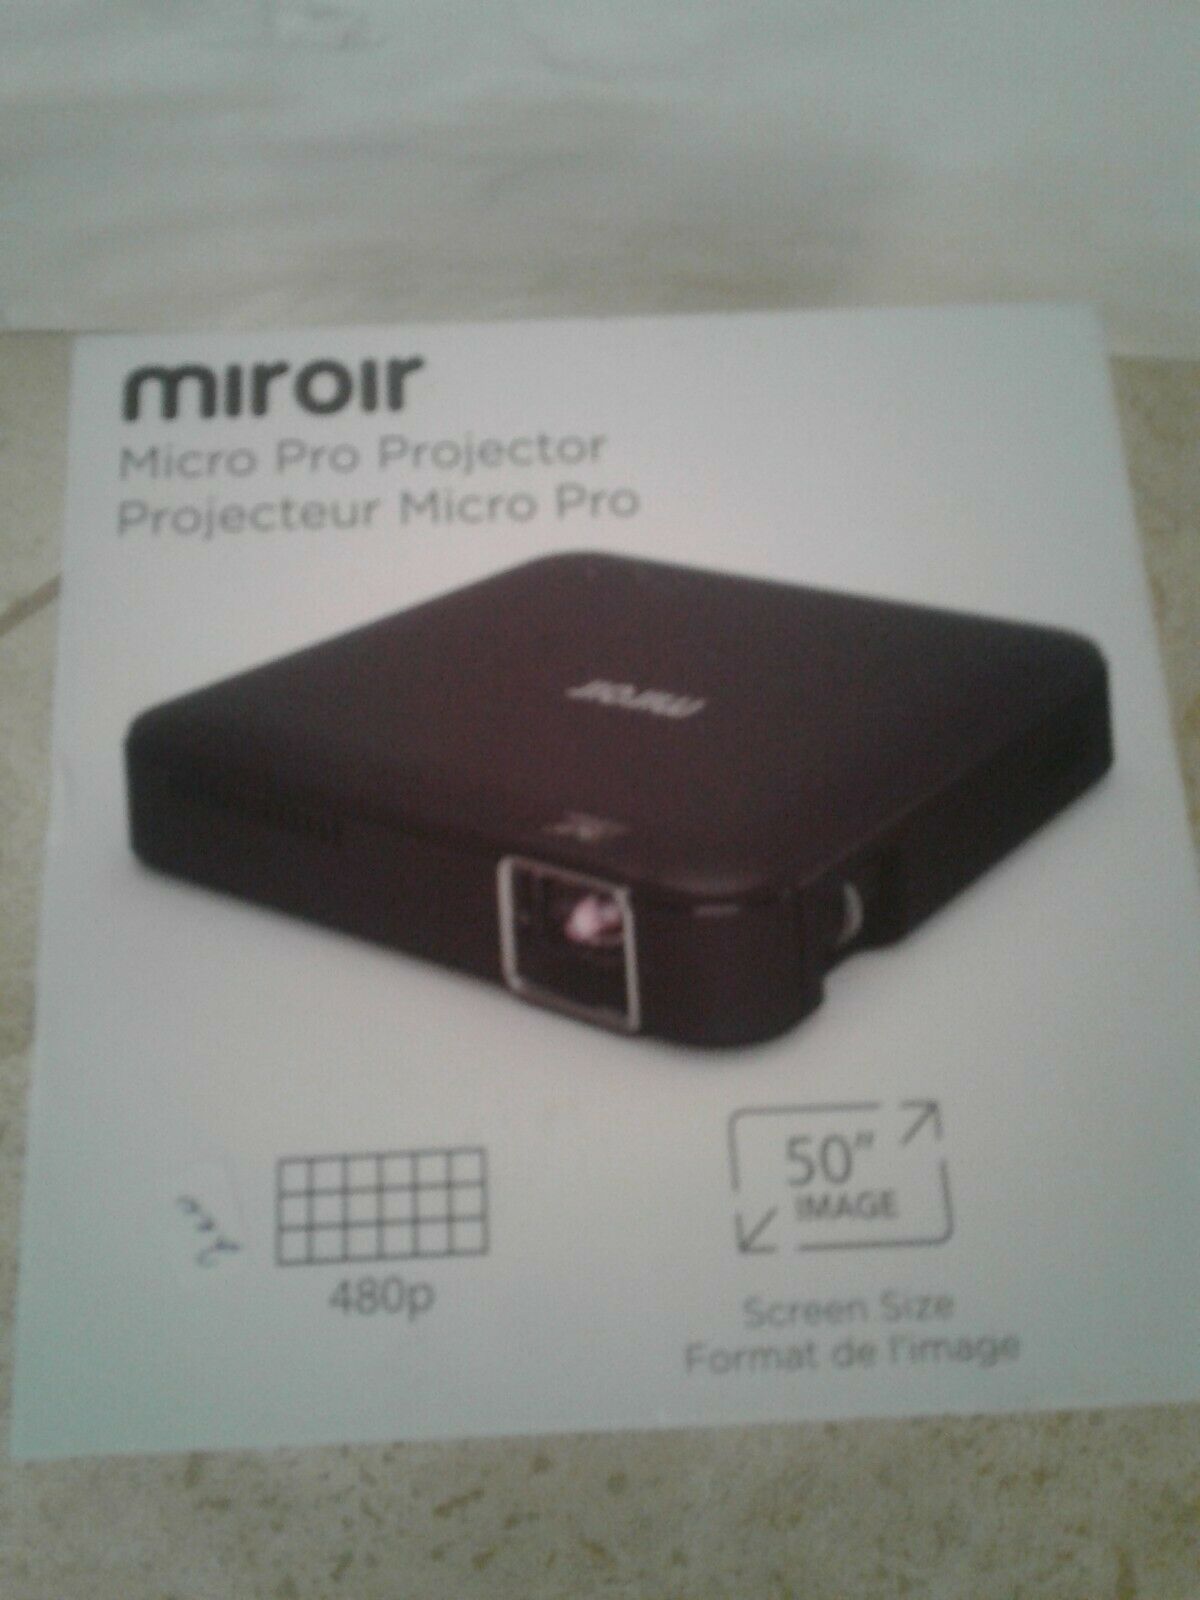 Miroir Micro Pro Projector 480p Dlp Led Portable Projector | M125 | New In Box